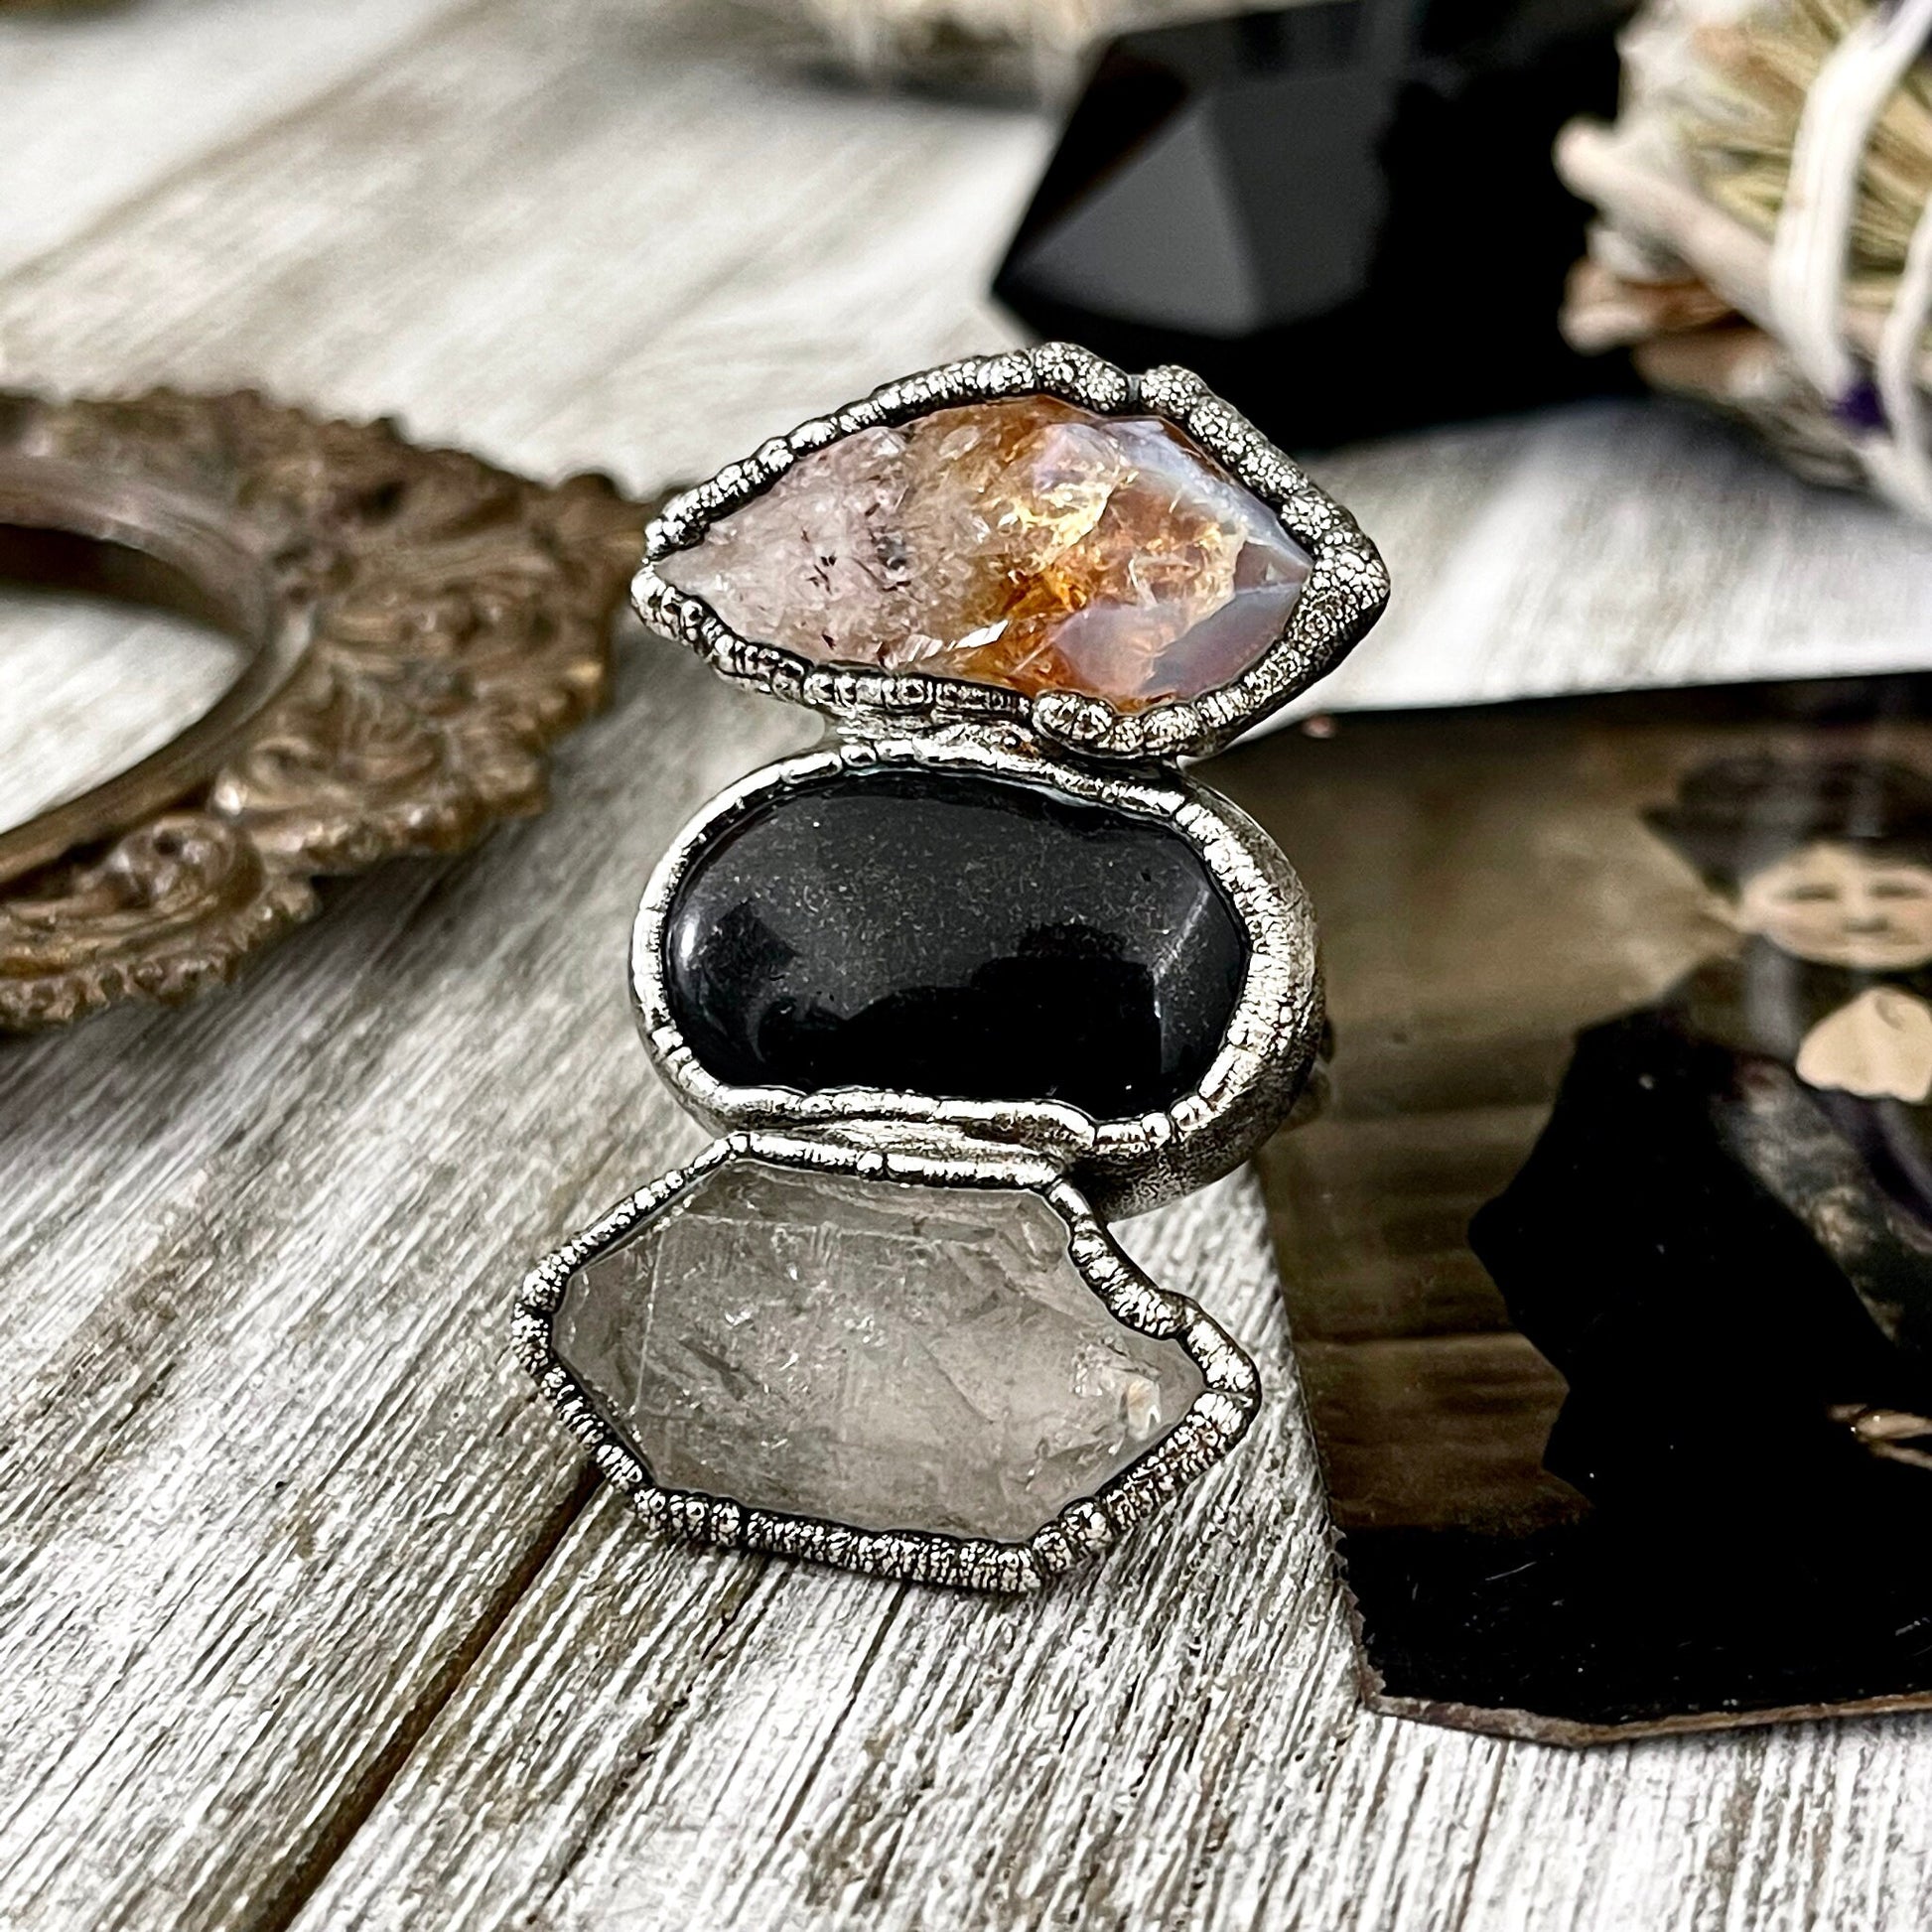 Size 9 Crystal Ring - Three Stone Black Onyx Yellow Citrine & Quartz Silver Ring / Foxlark Collection - One of a Kind / Big Crystal Jewelry